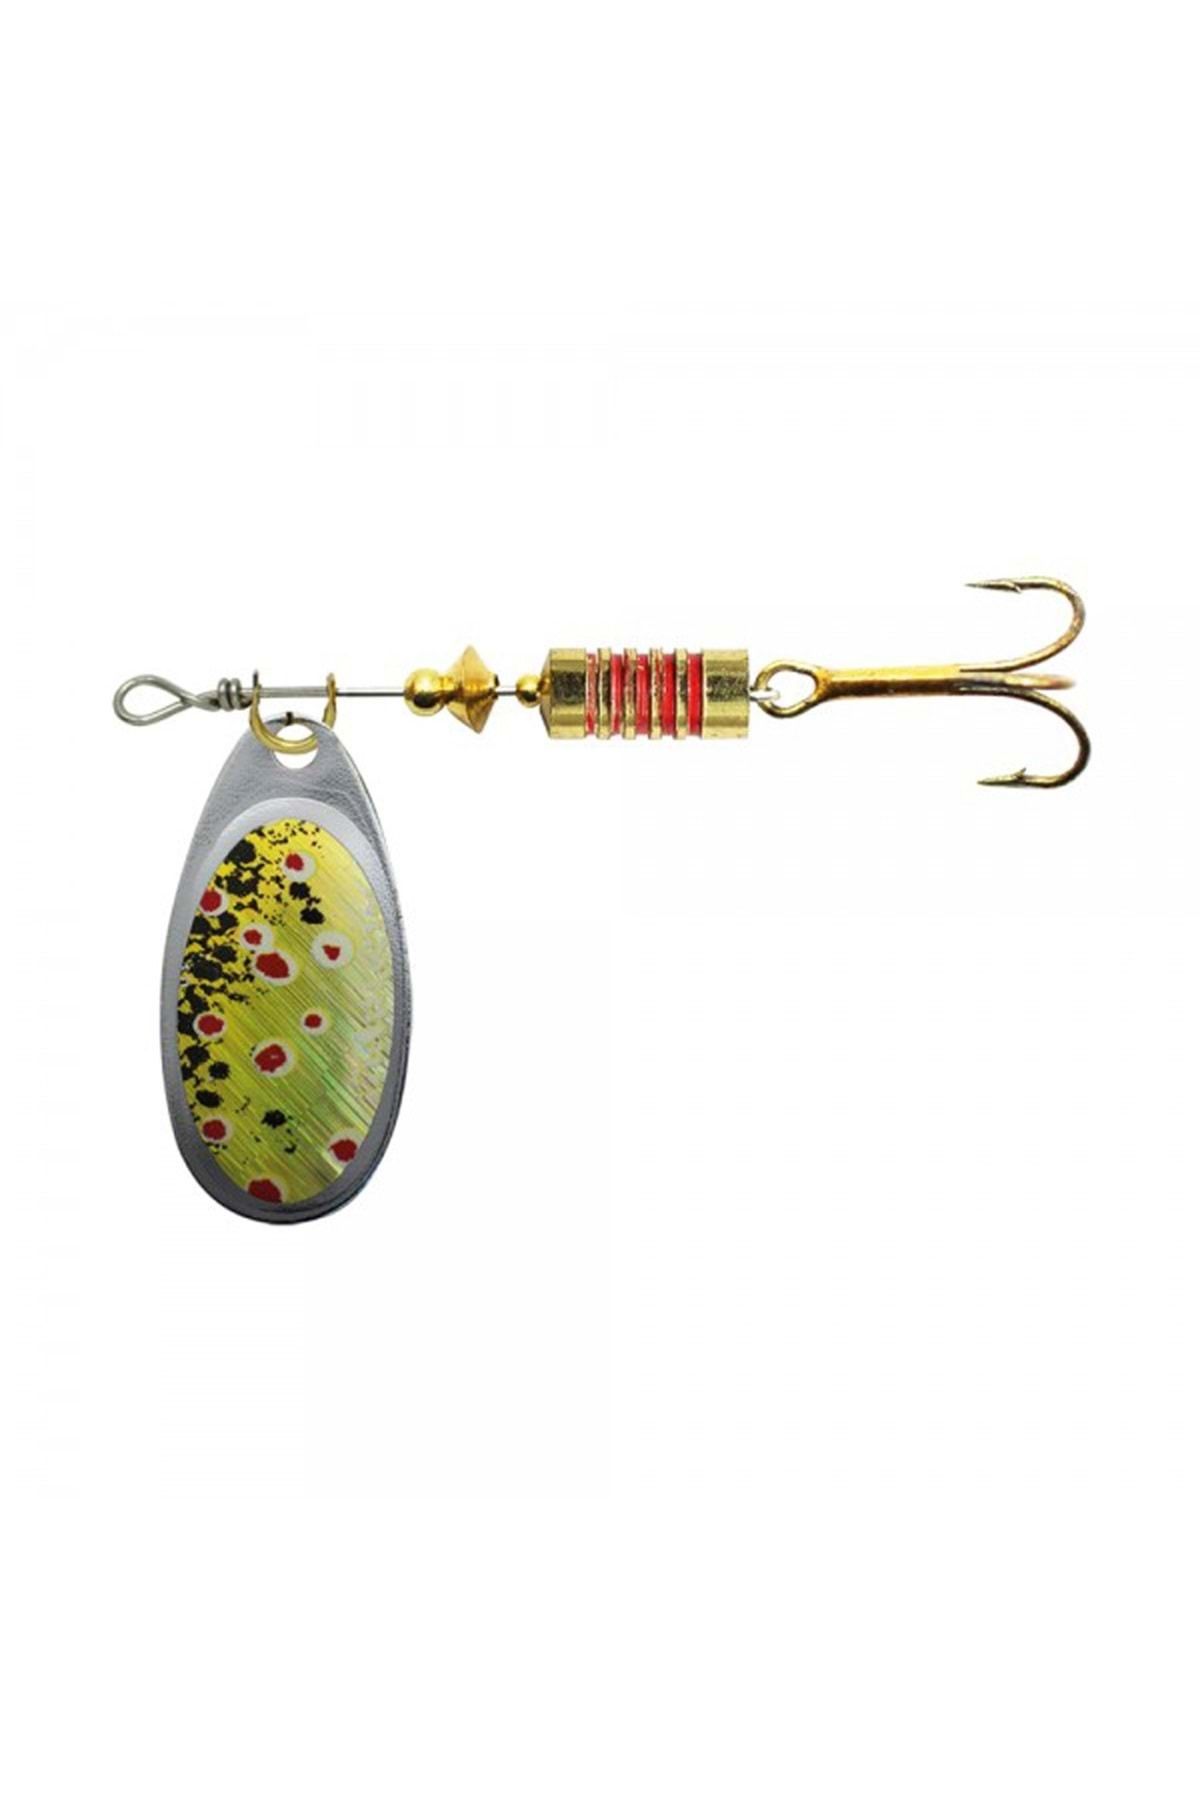 EFFE Spinner Trout Spoon No:0-2gr - Hg 2113